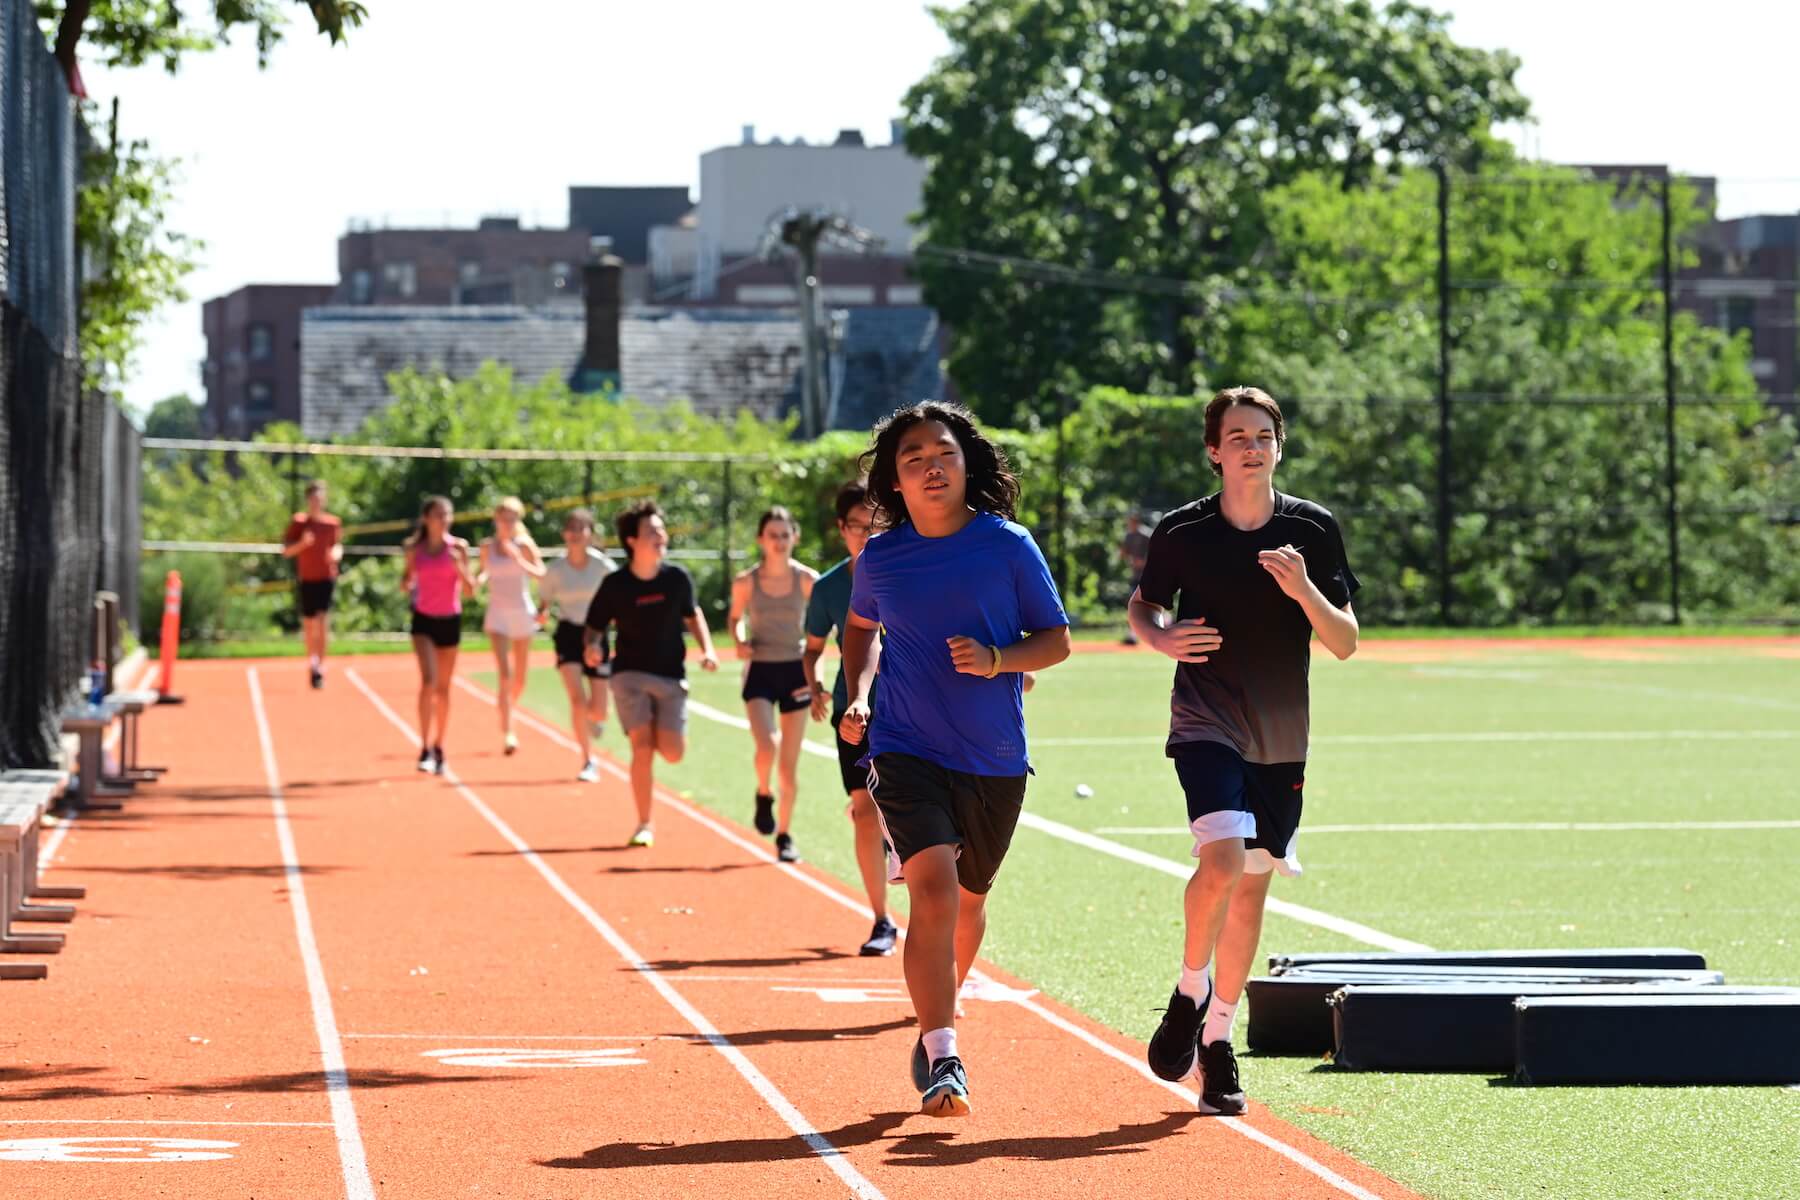 Ethical Culture Fieldston School Fieldston Upper track team practices on the track